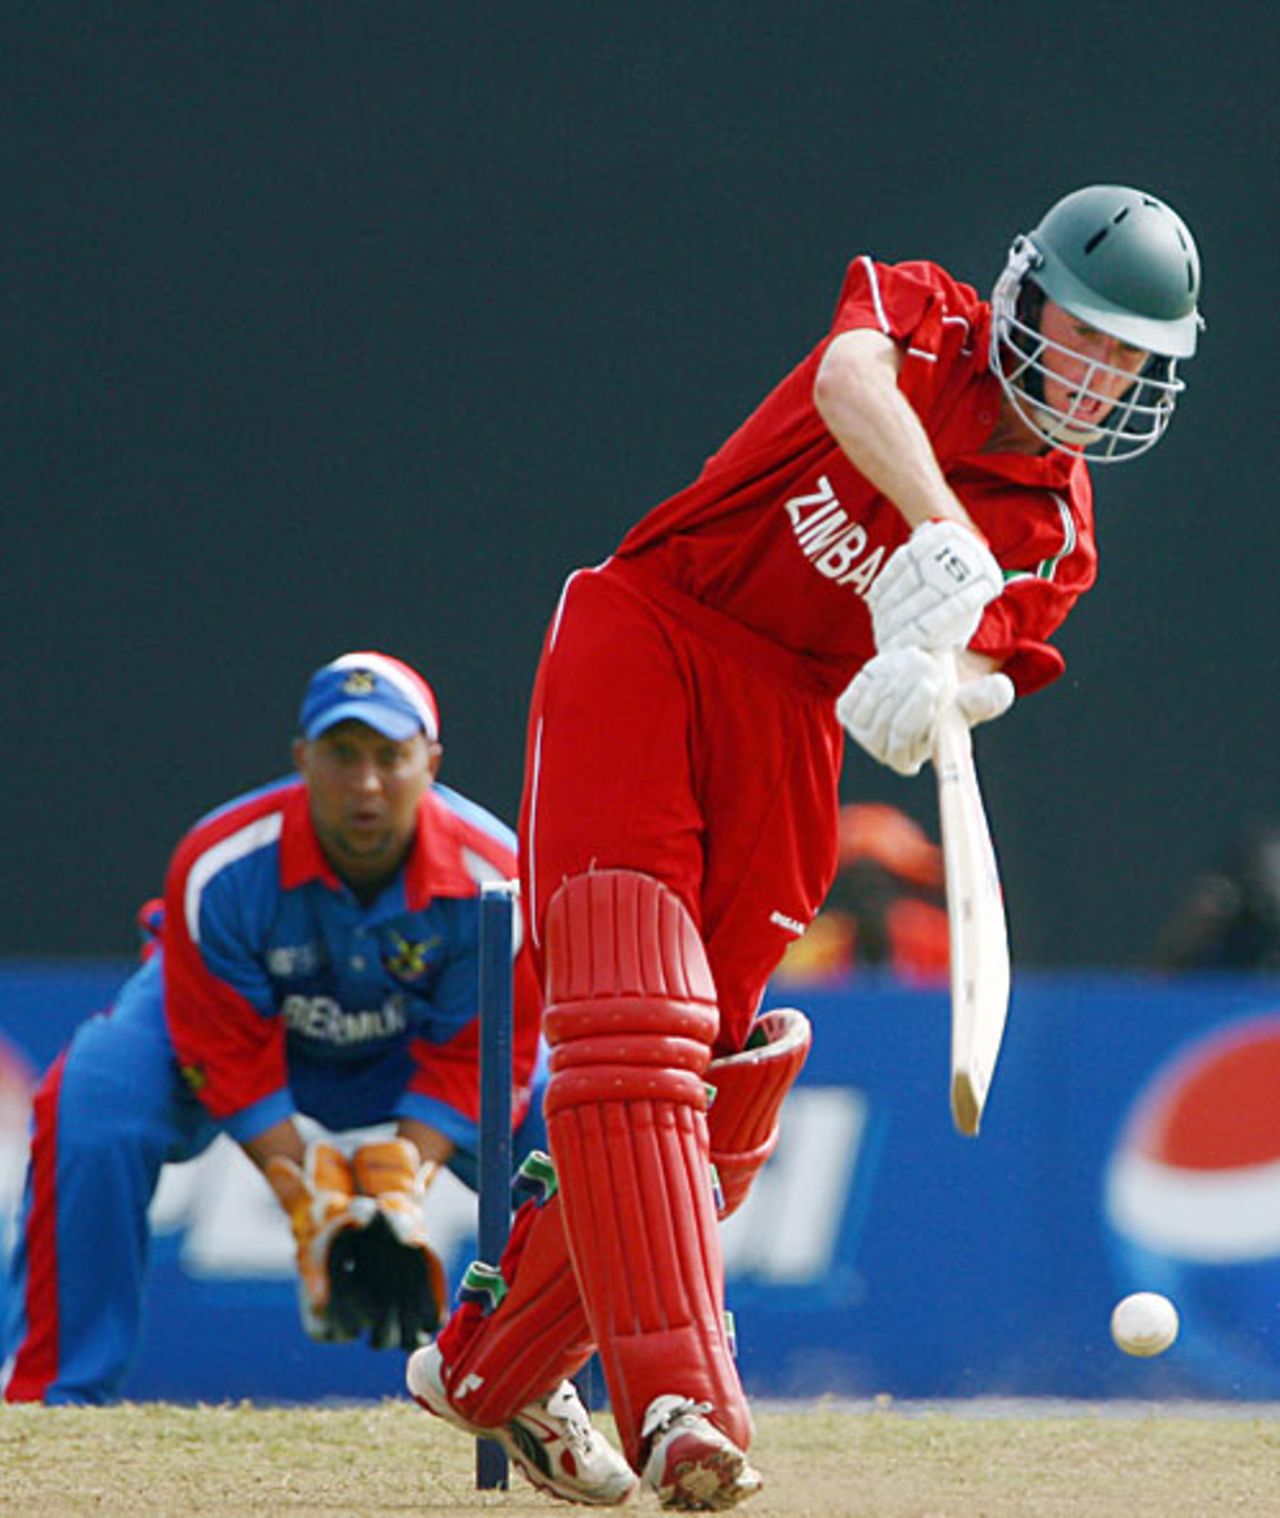 Sean Williams skips down the pitch to drive, Bermuda v Zimbabwe, 2007 World Cup warm-up, Kingstown, March 8, 2007